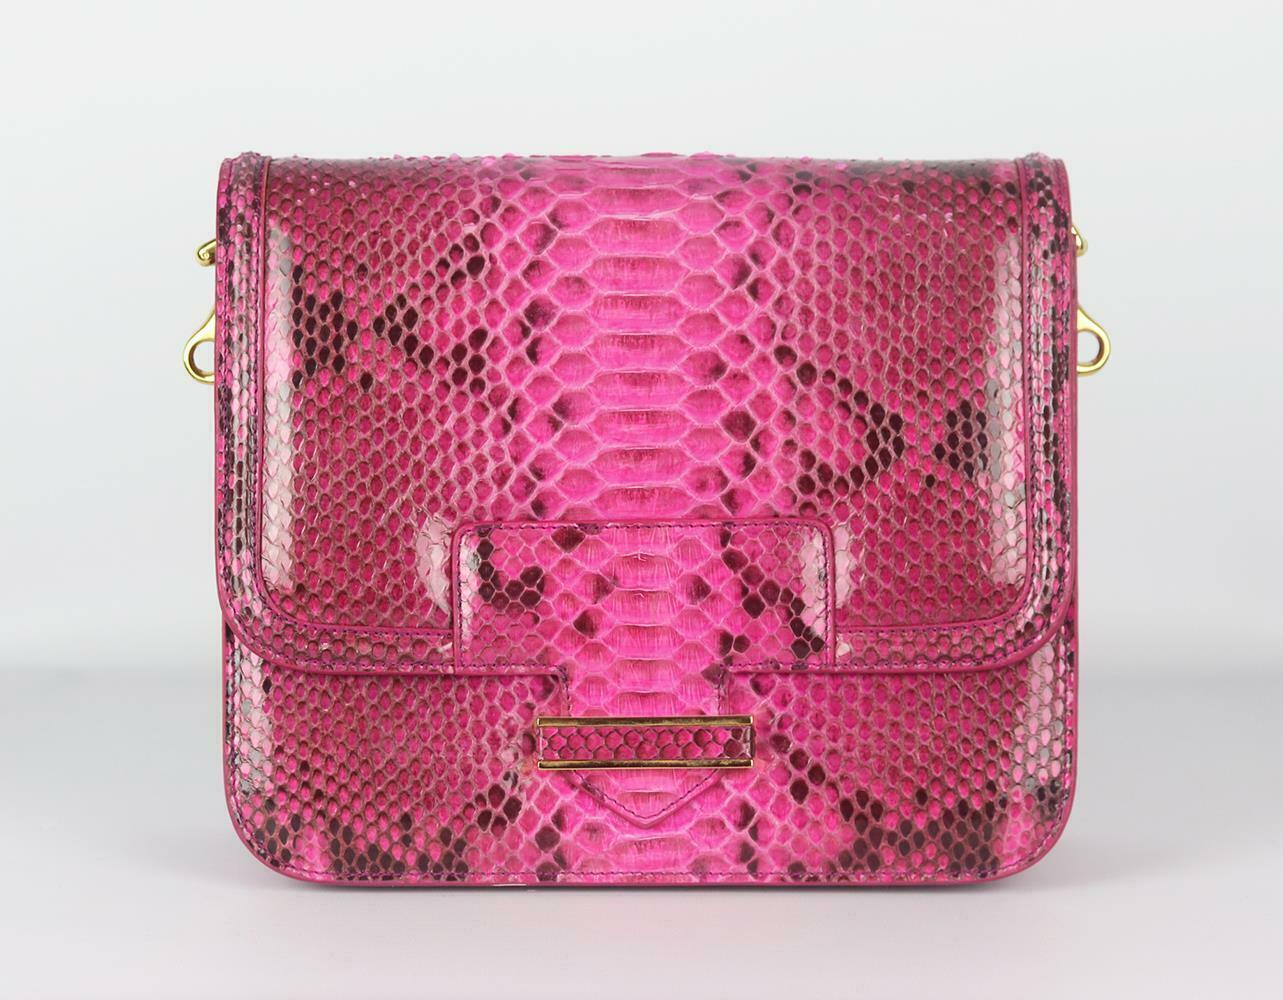 Stark took cues from classic pieces, this 'Come Hither' shoulder bag is re-imagined from a classic flap and has been crafted bright-pink python exterior and grey suede lining in a satchel shape with flap front with two compartments and zip pocket